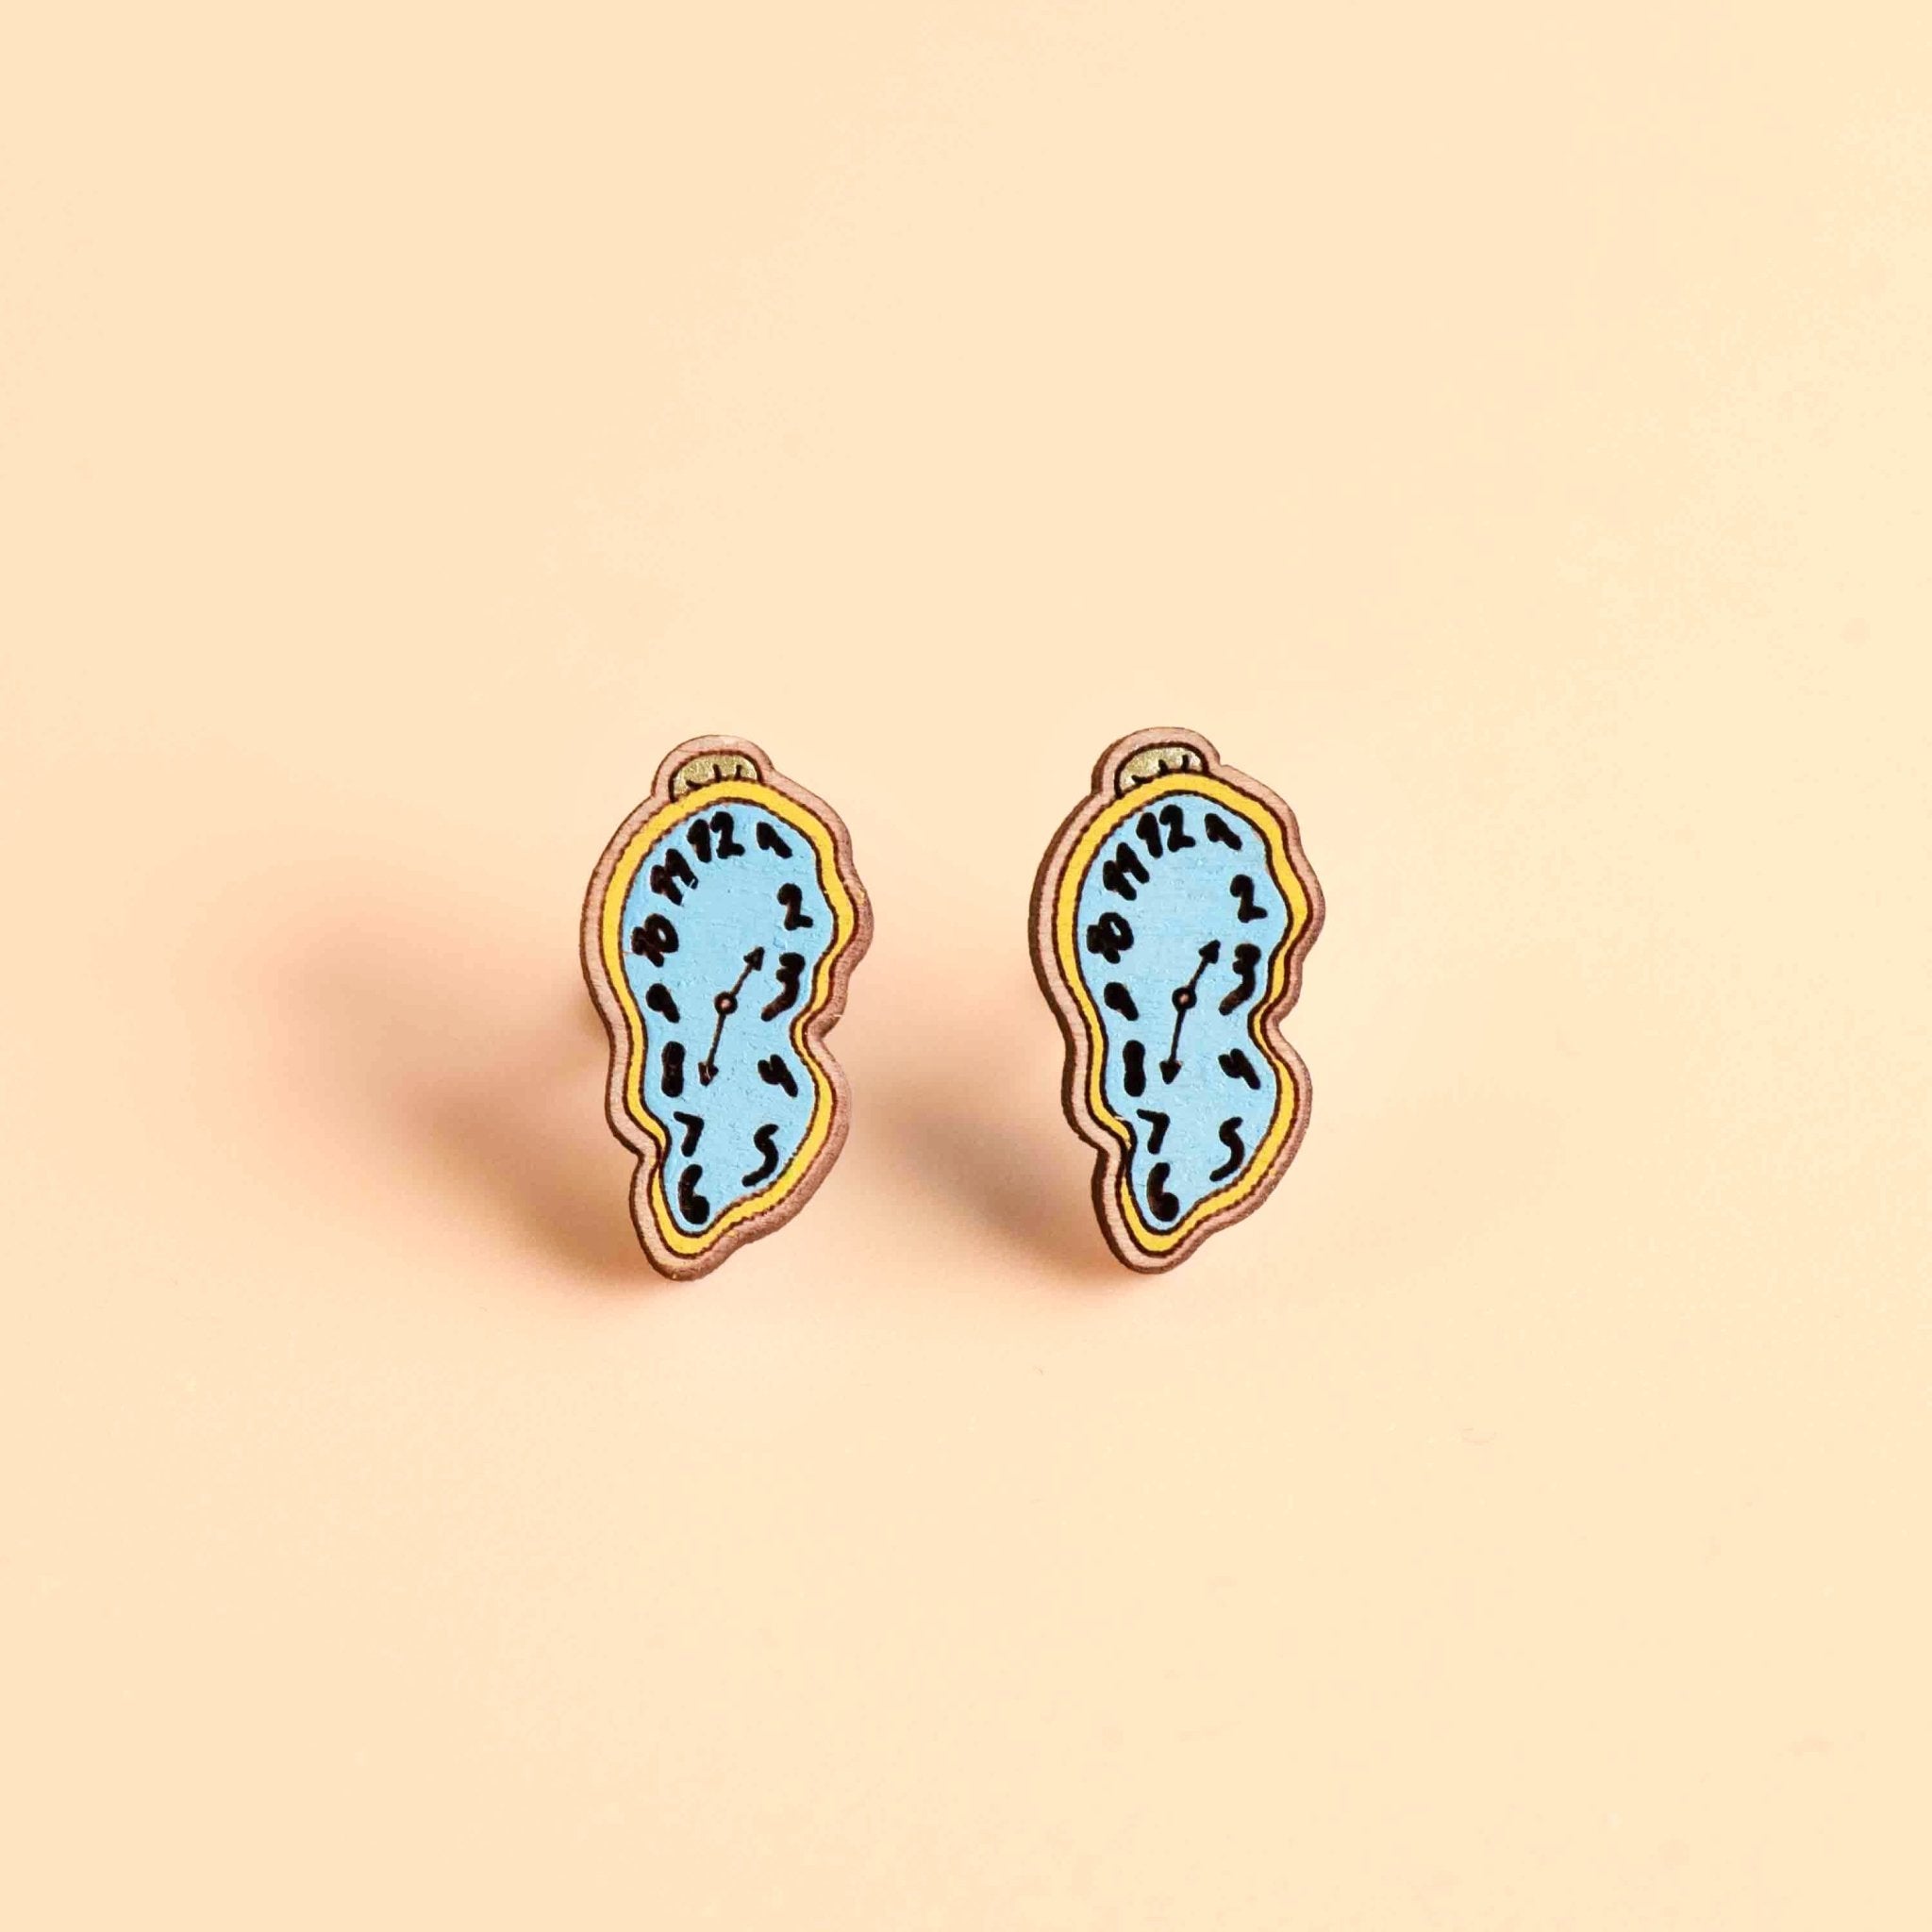 Hand-Painted Melting Clock Stud Earrings Inspired by Salvador Dali -PET15112 - Robin Valley Official Store